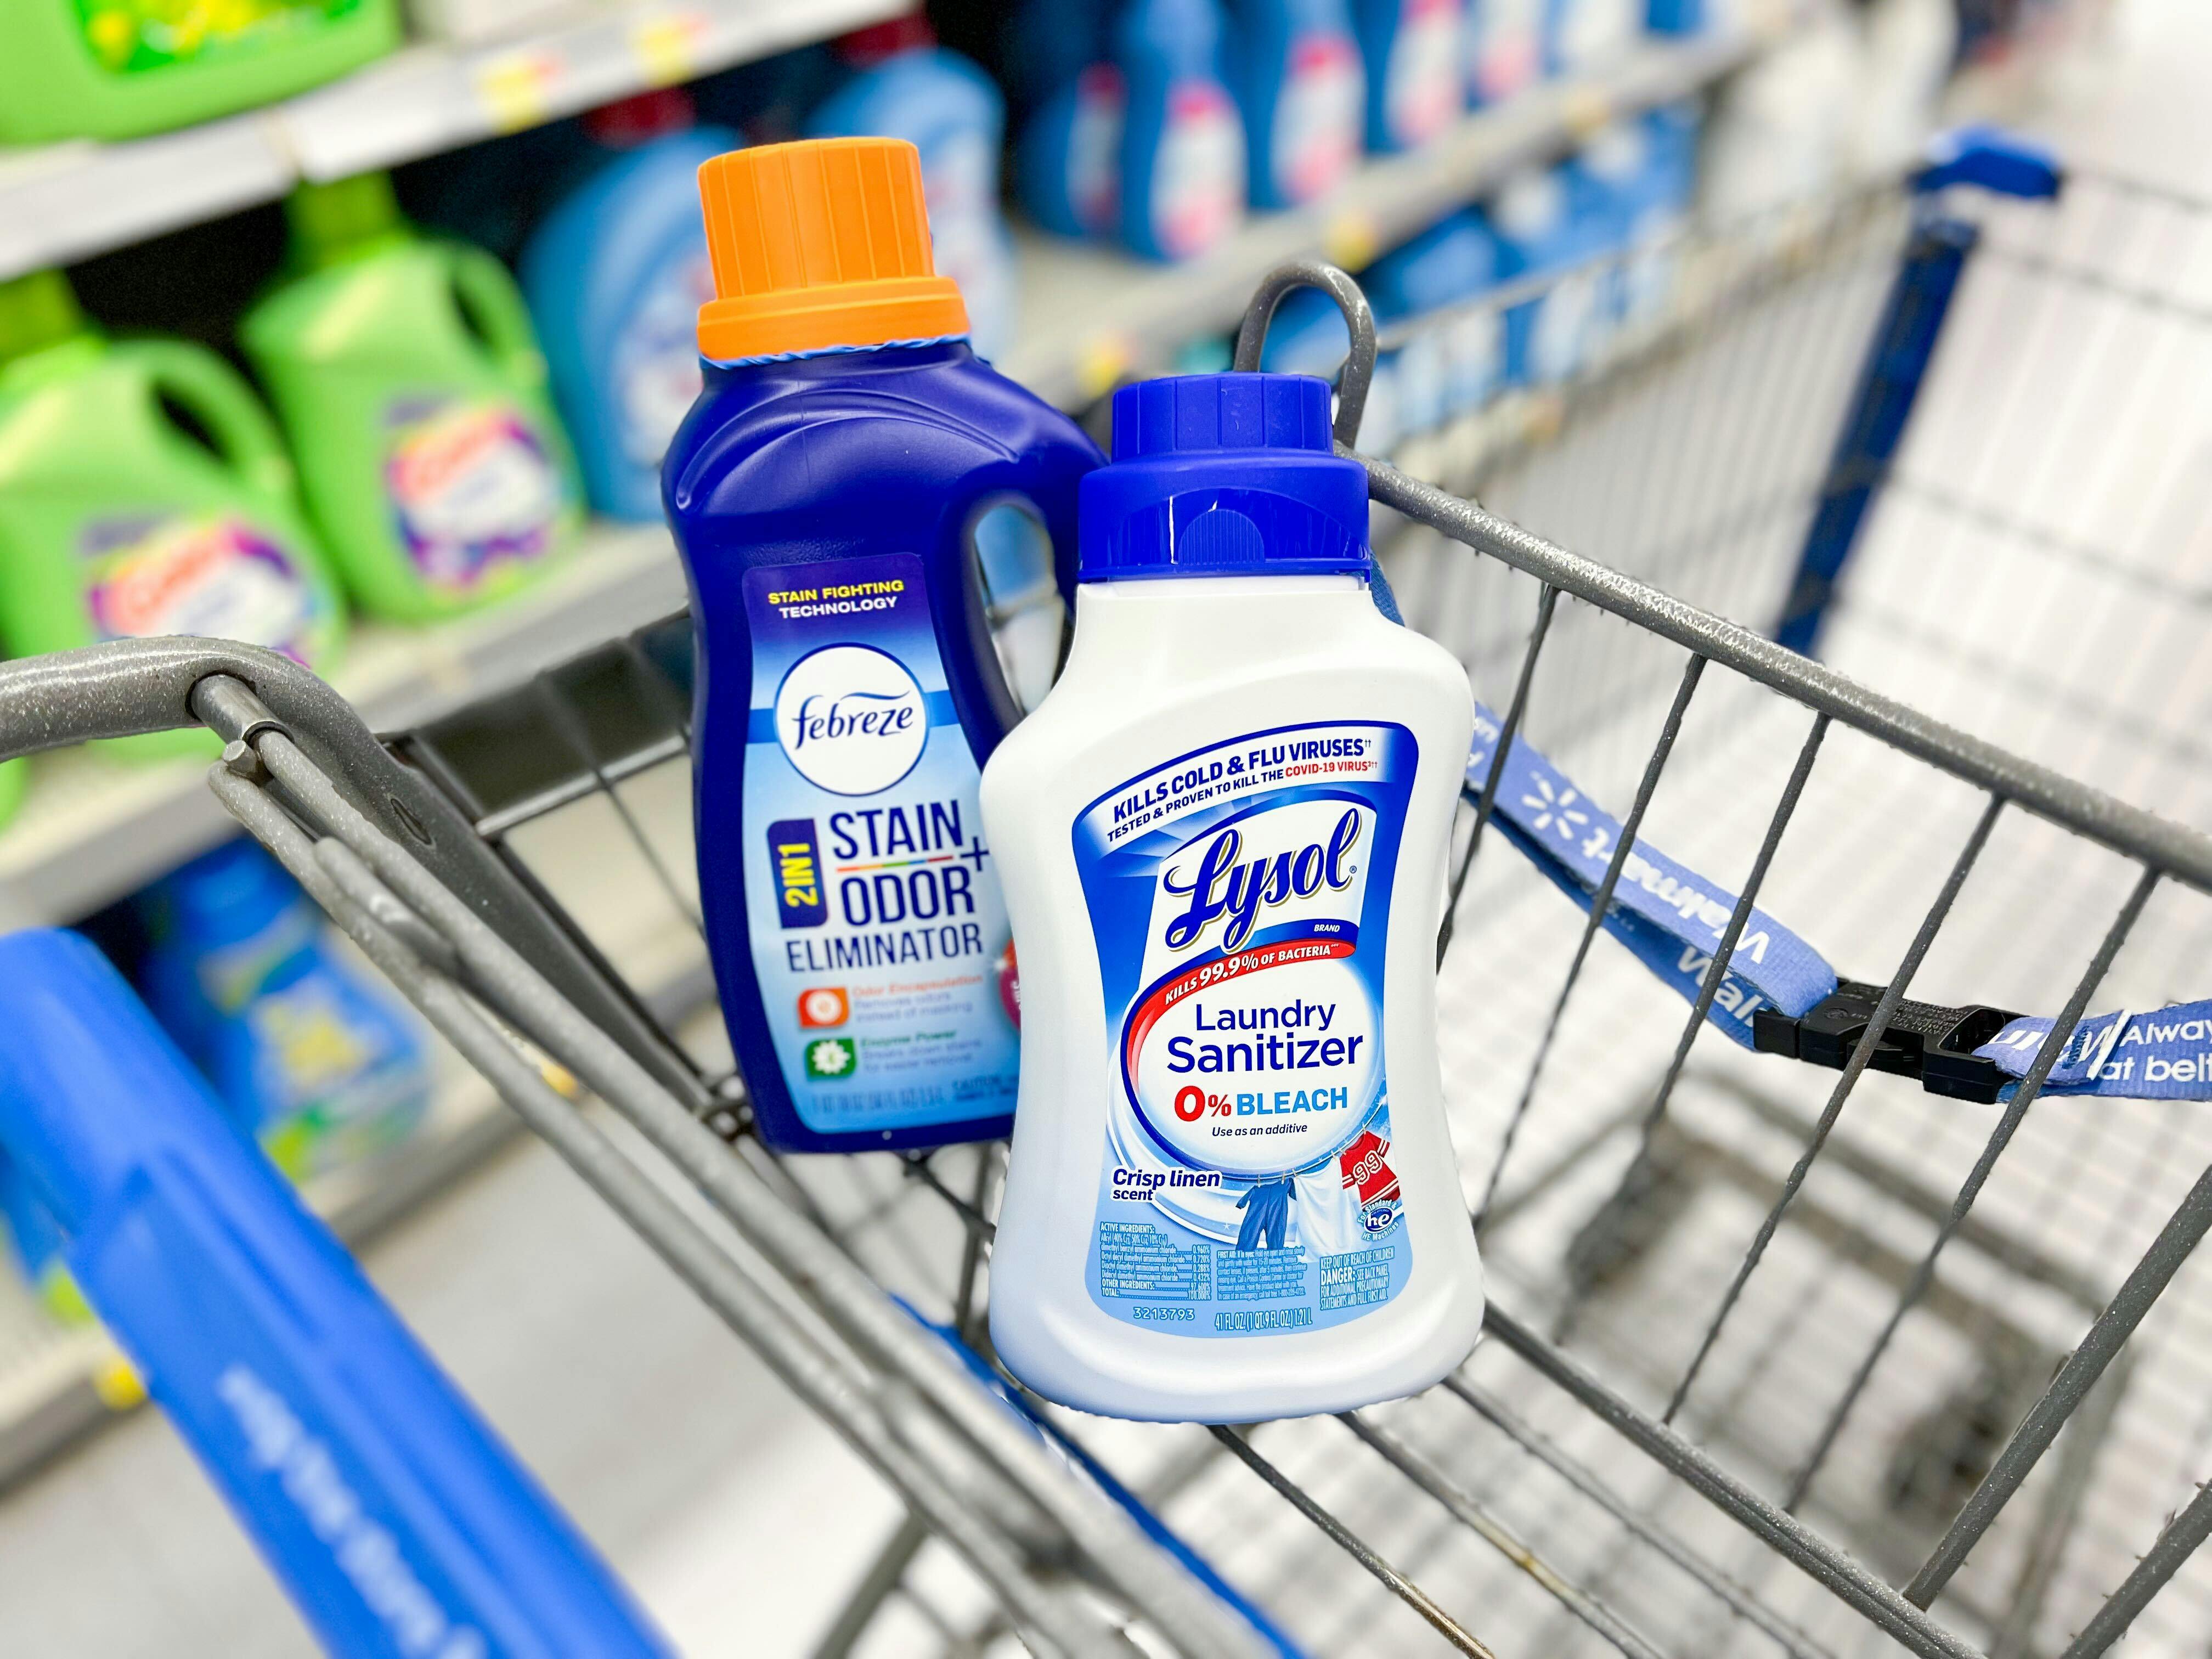 Spray 'N Wash Laundry Stain Remover Just $1.99 At Kroger